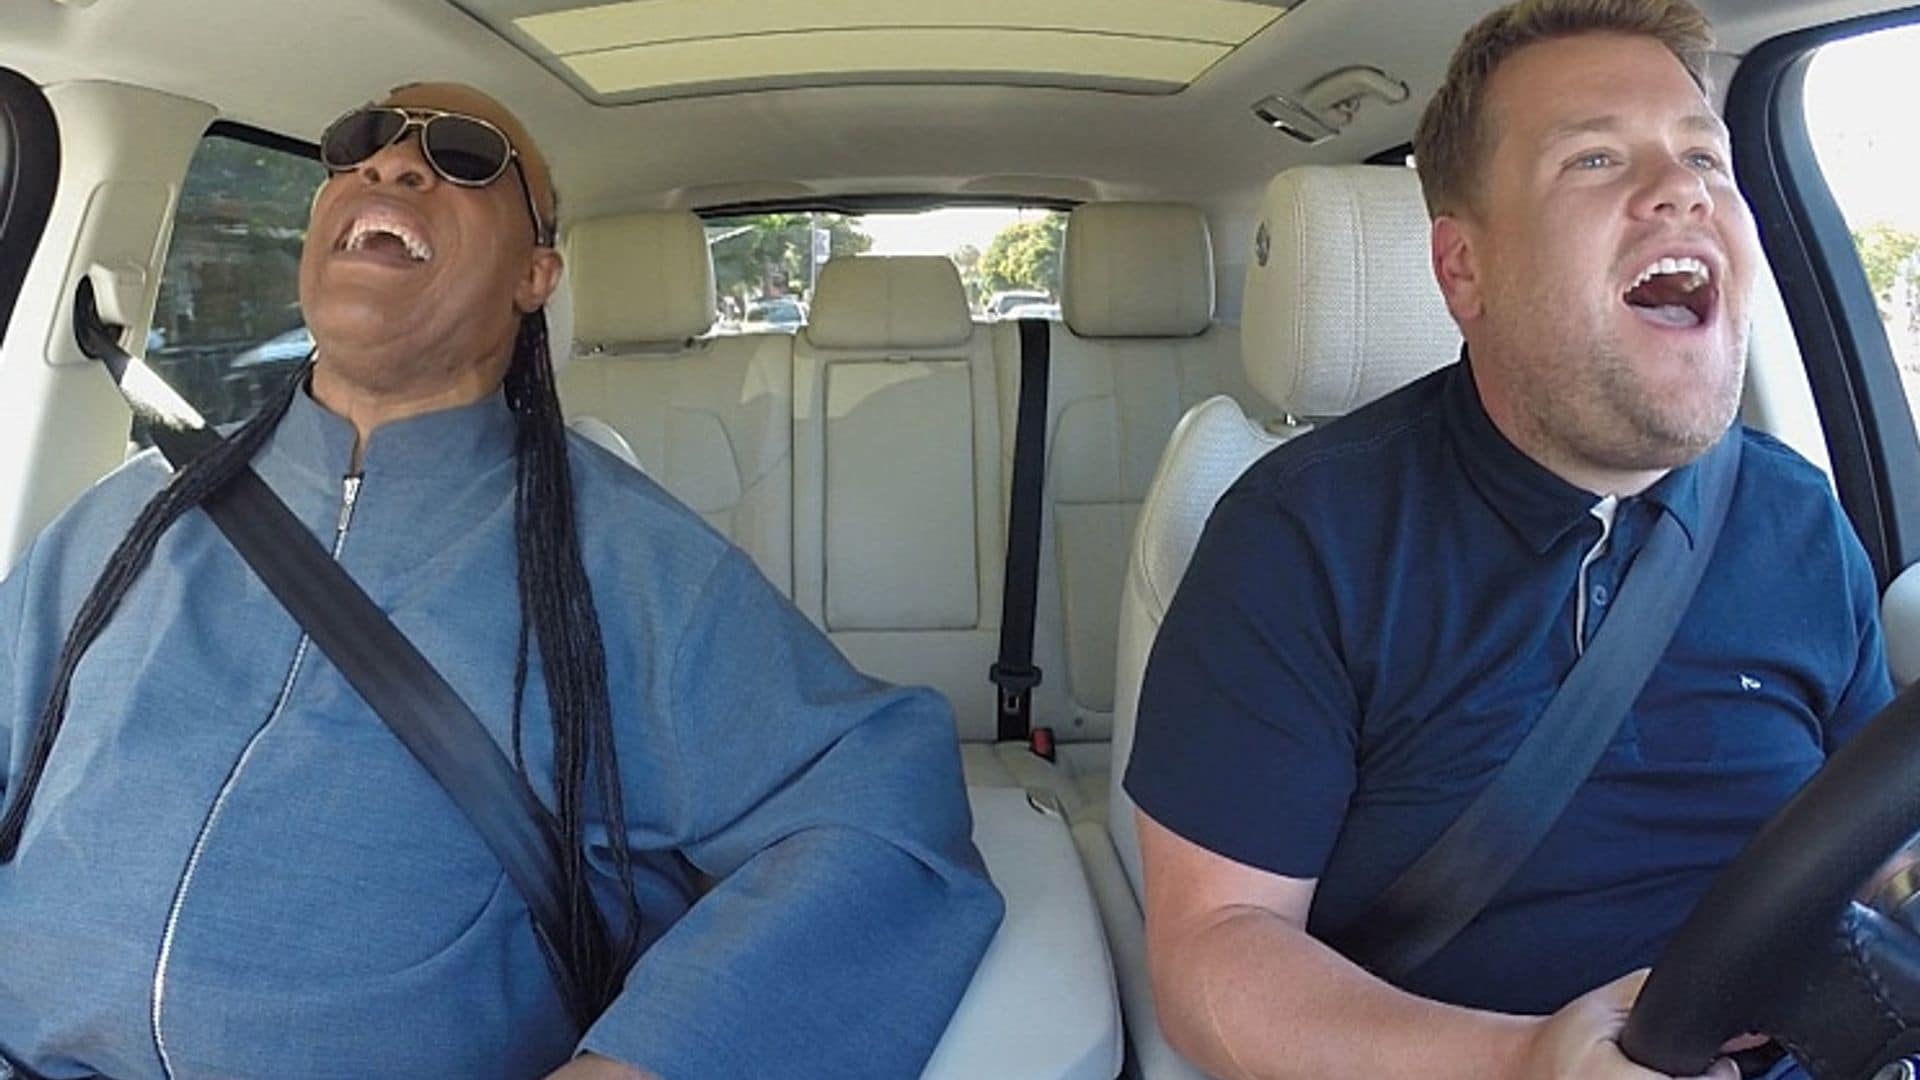 Stevie Wonder serenades James Corden's wife on the 'Late Late Show'